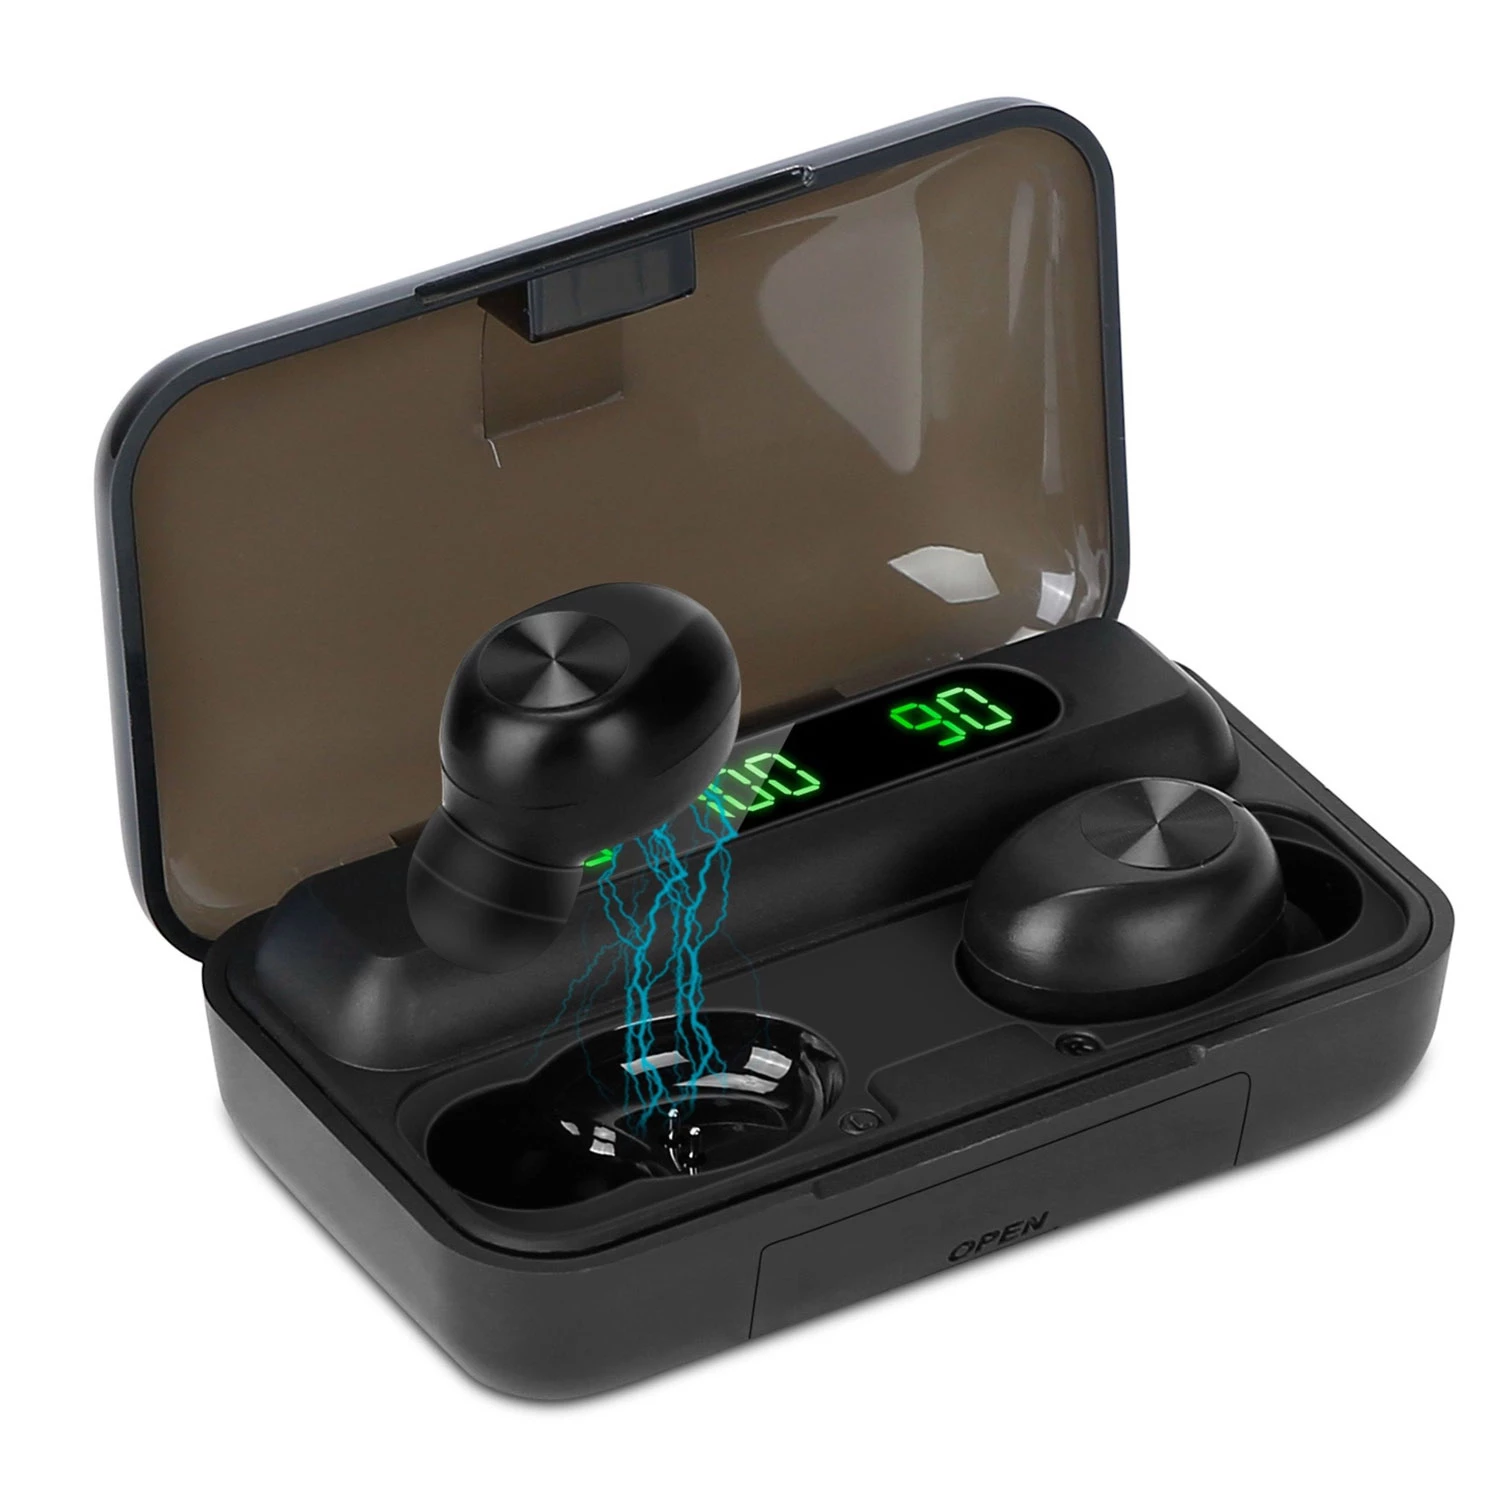 Wireless TWS Earbuds - 5.1 Stereo Headset, Noise Canceling, Mic, Magnetic Charging Dock